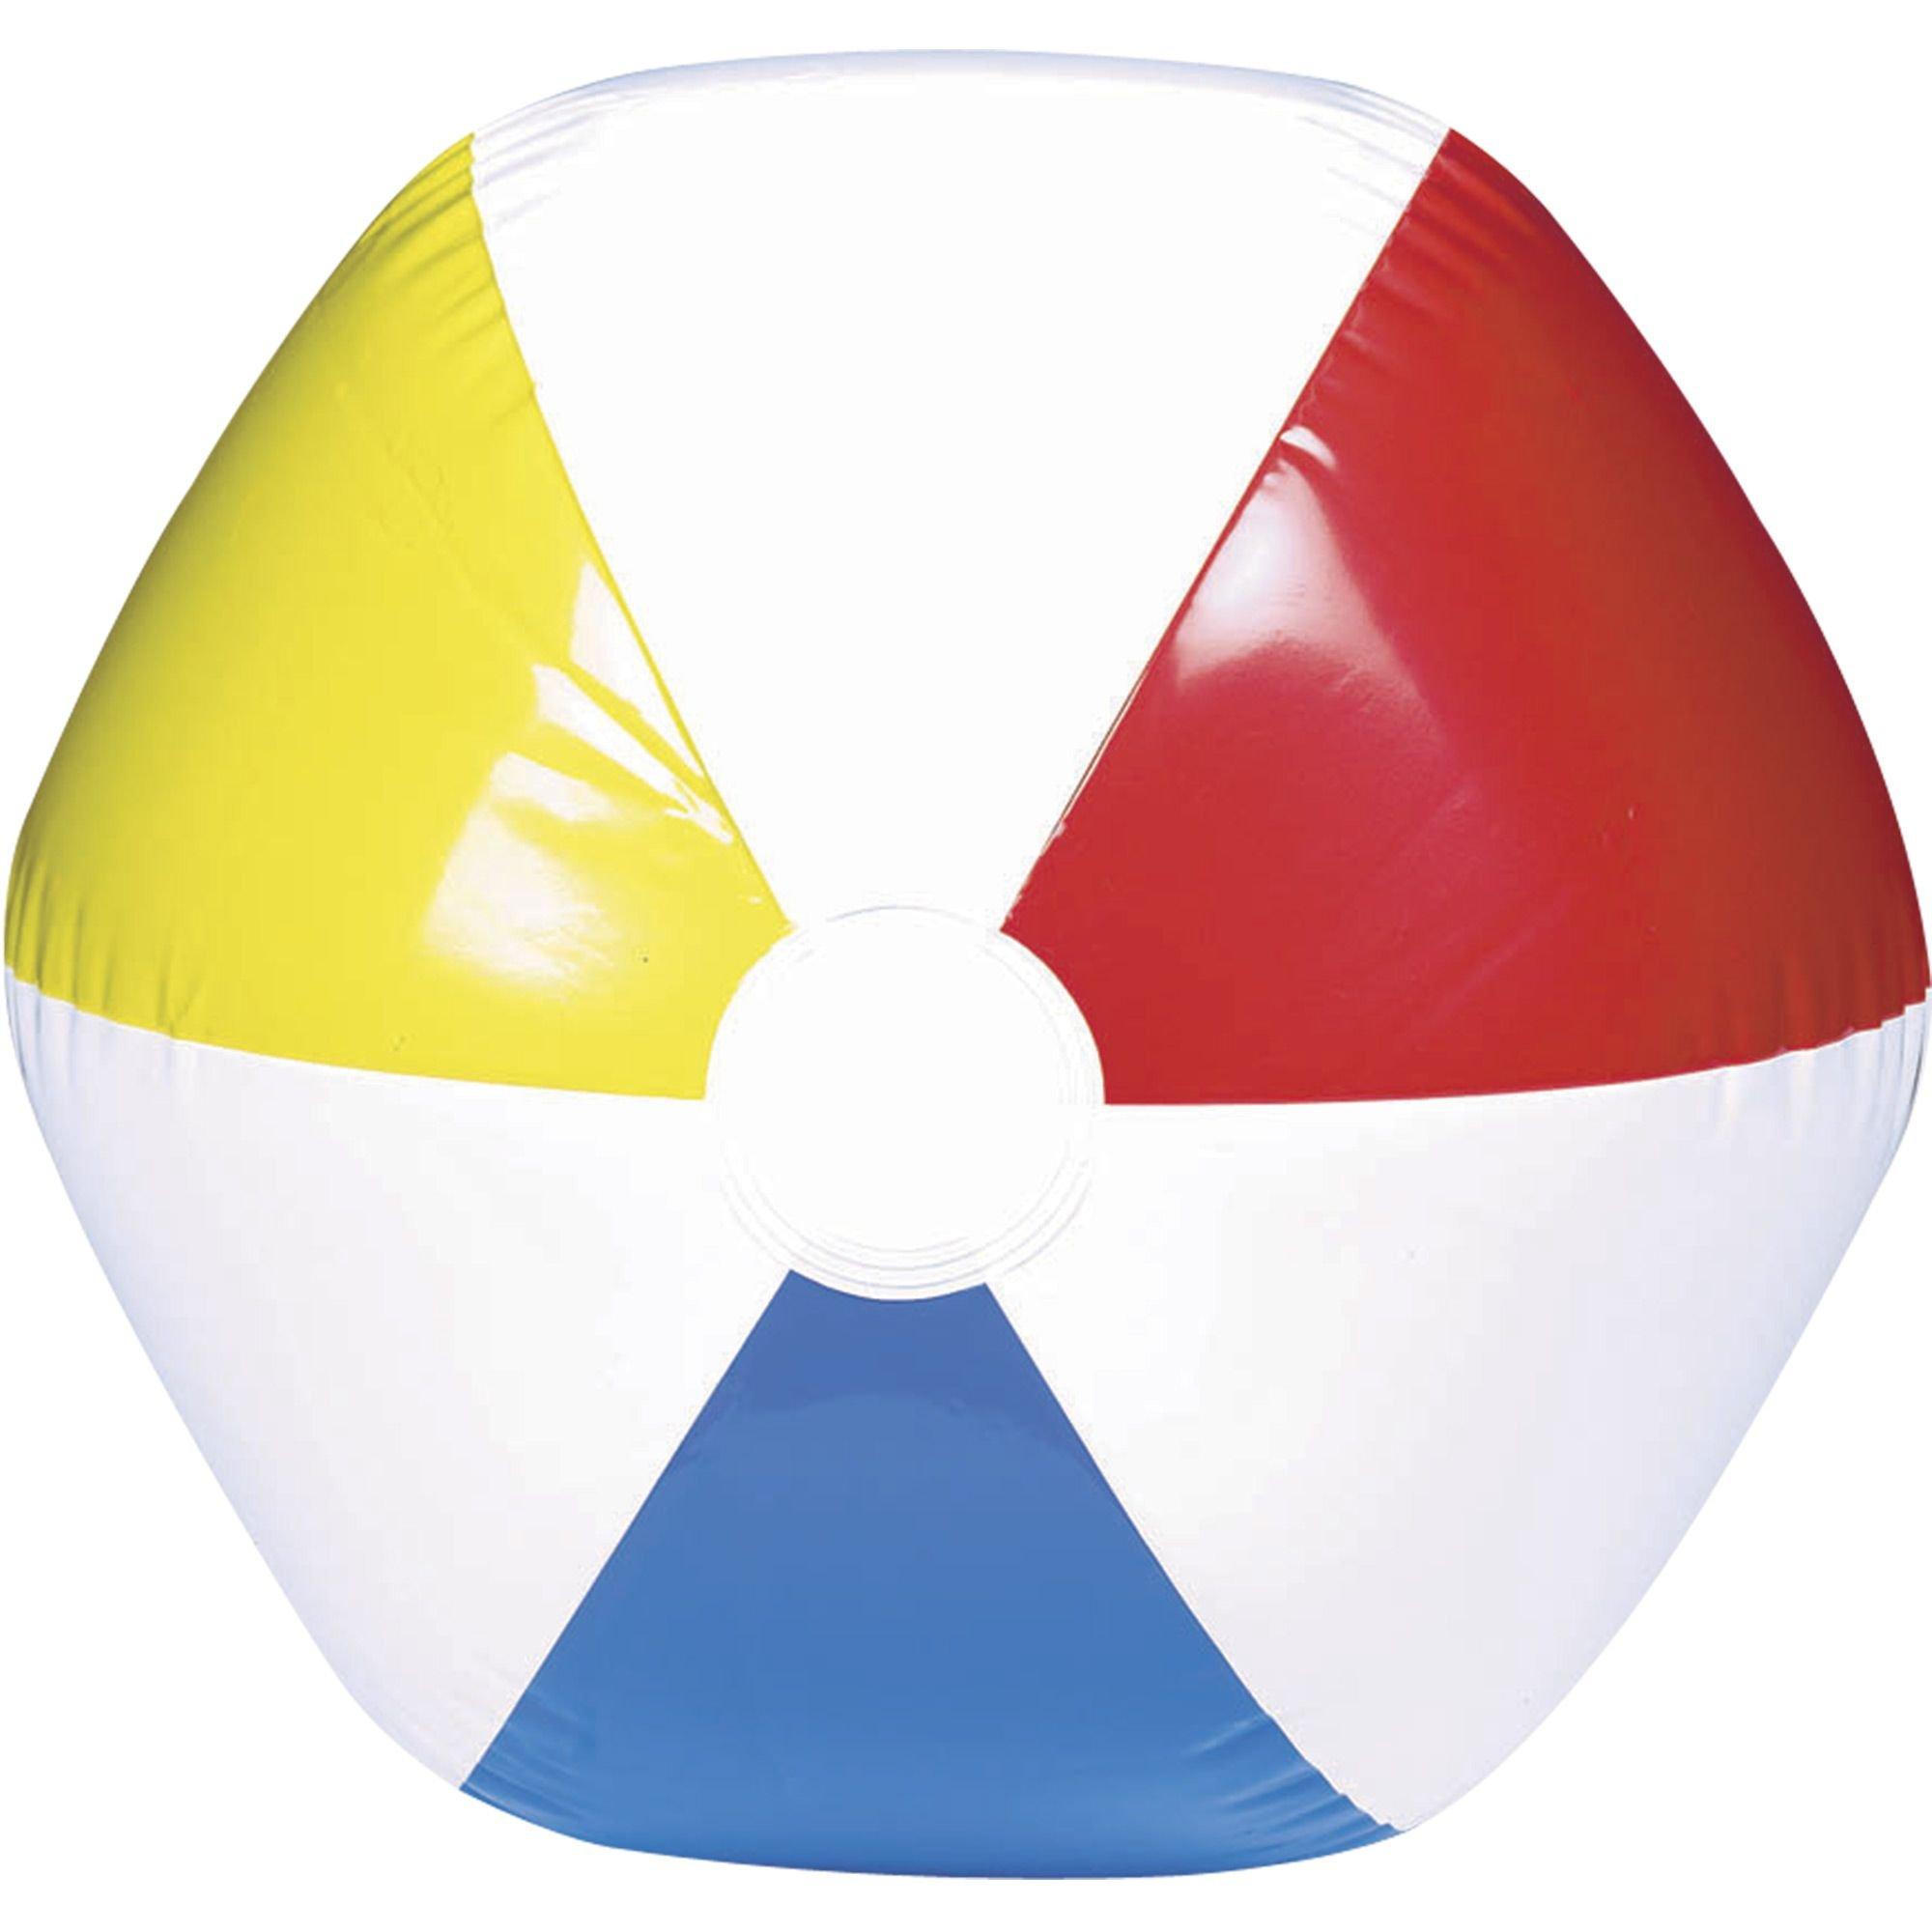 20 Inflatable 6-Panel Beach Ball Swimming Pool Toy